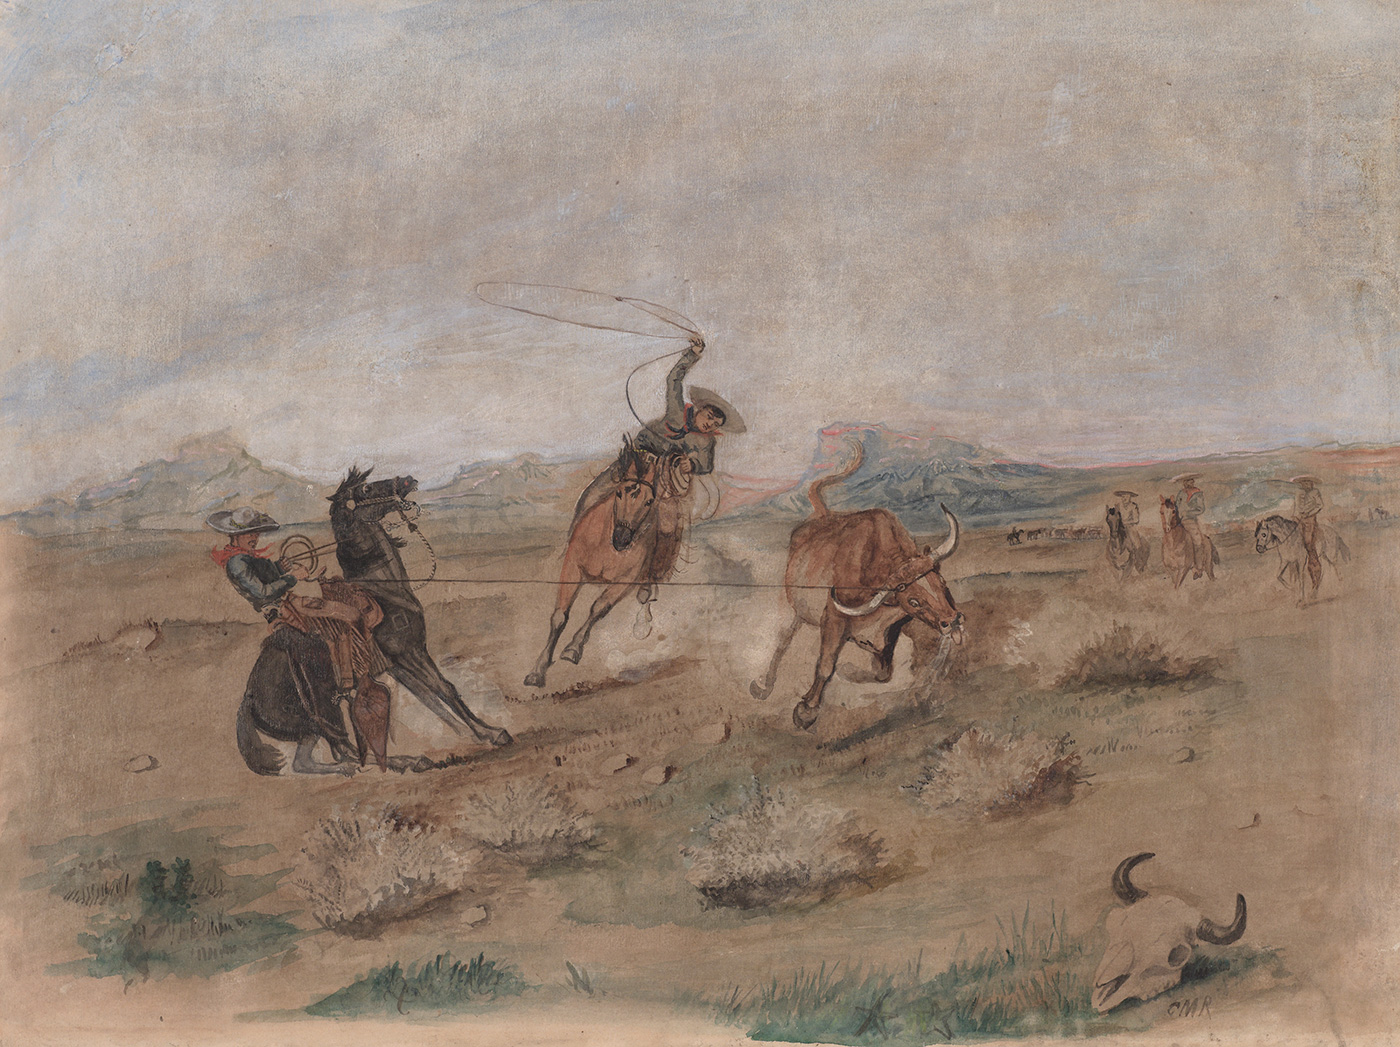 Two men on horseback are roping a steer in an open landscape.